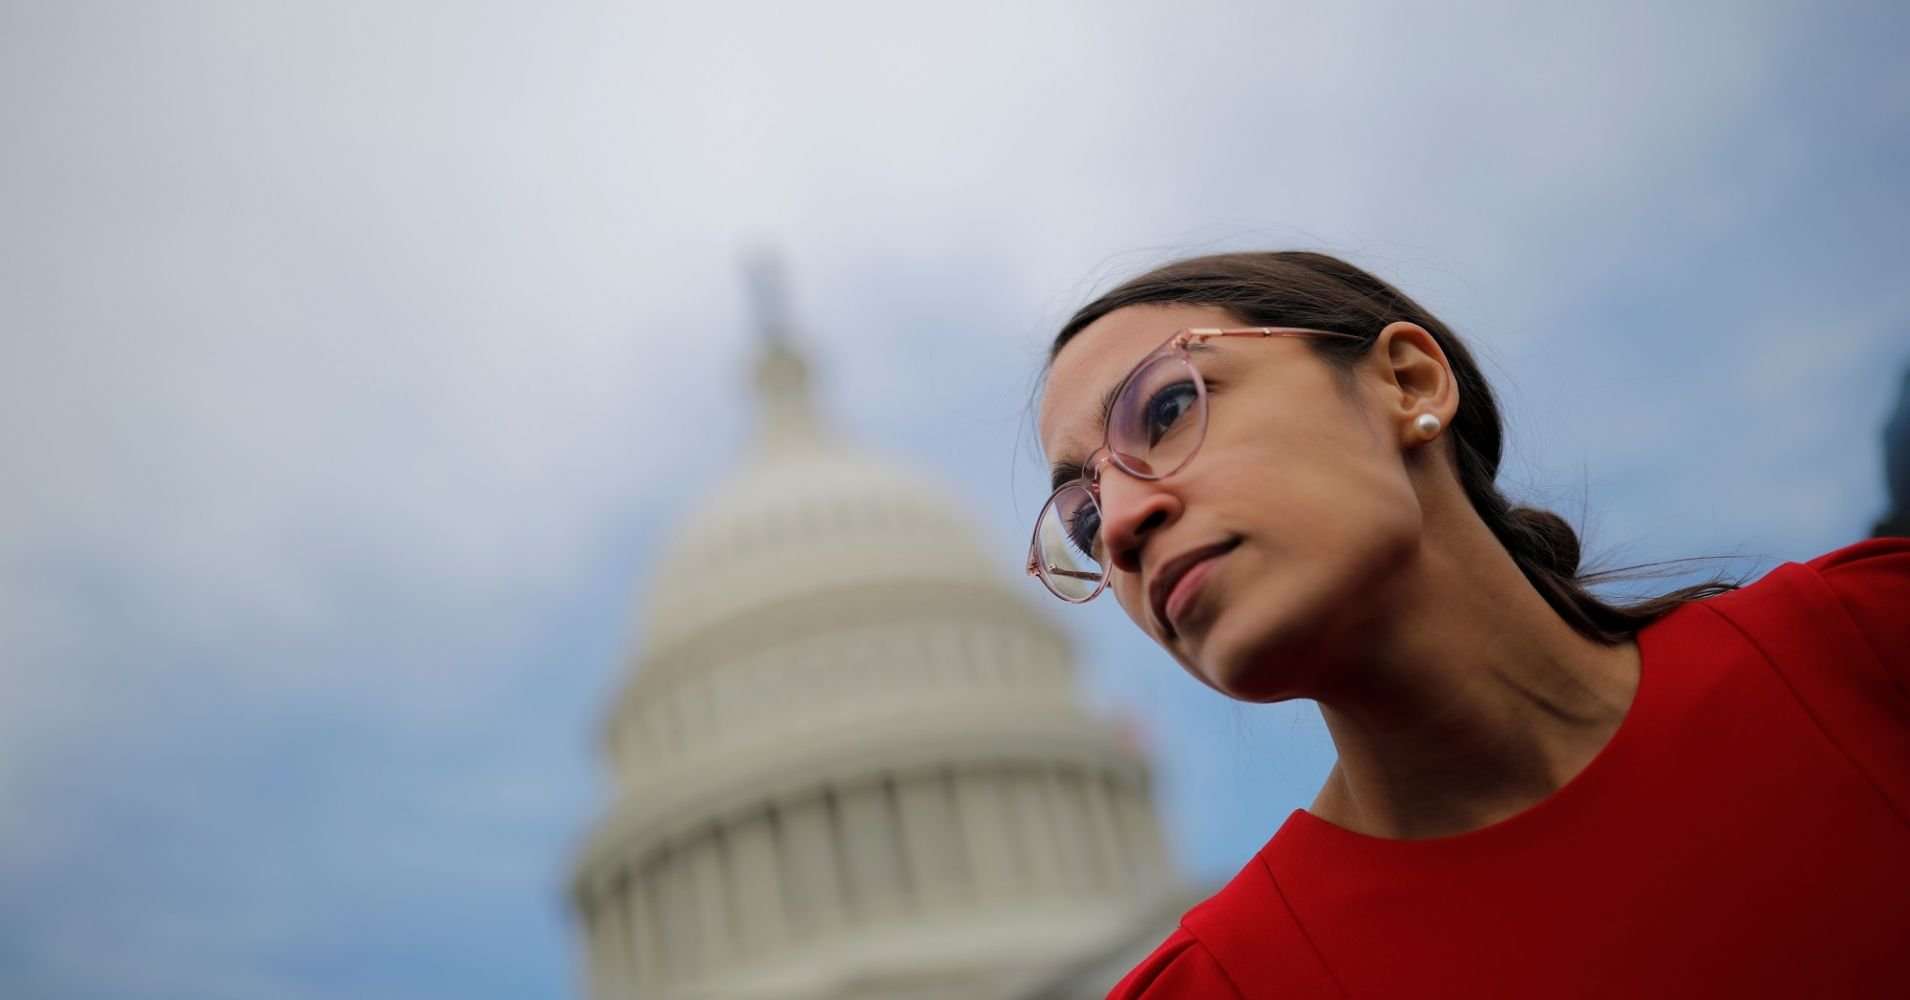 image for Alexandria Ocasio-Cortez floats 70% tax on wealthy to pay for 'Green New Deal'